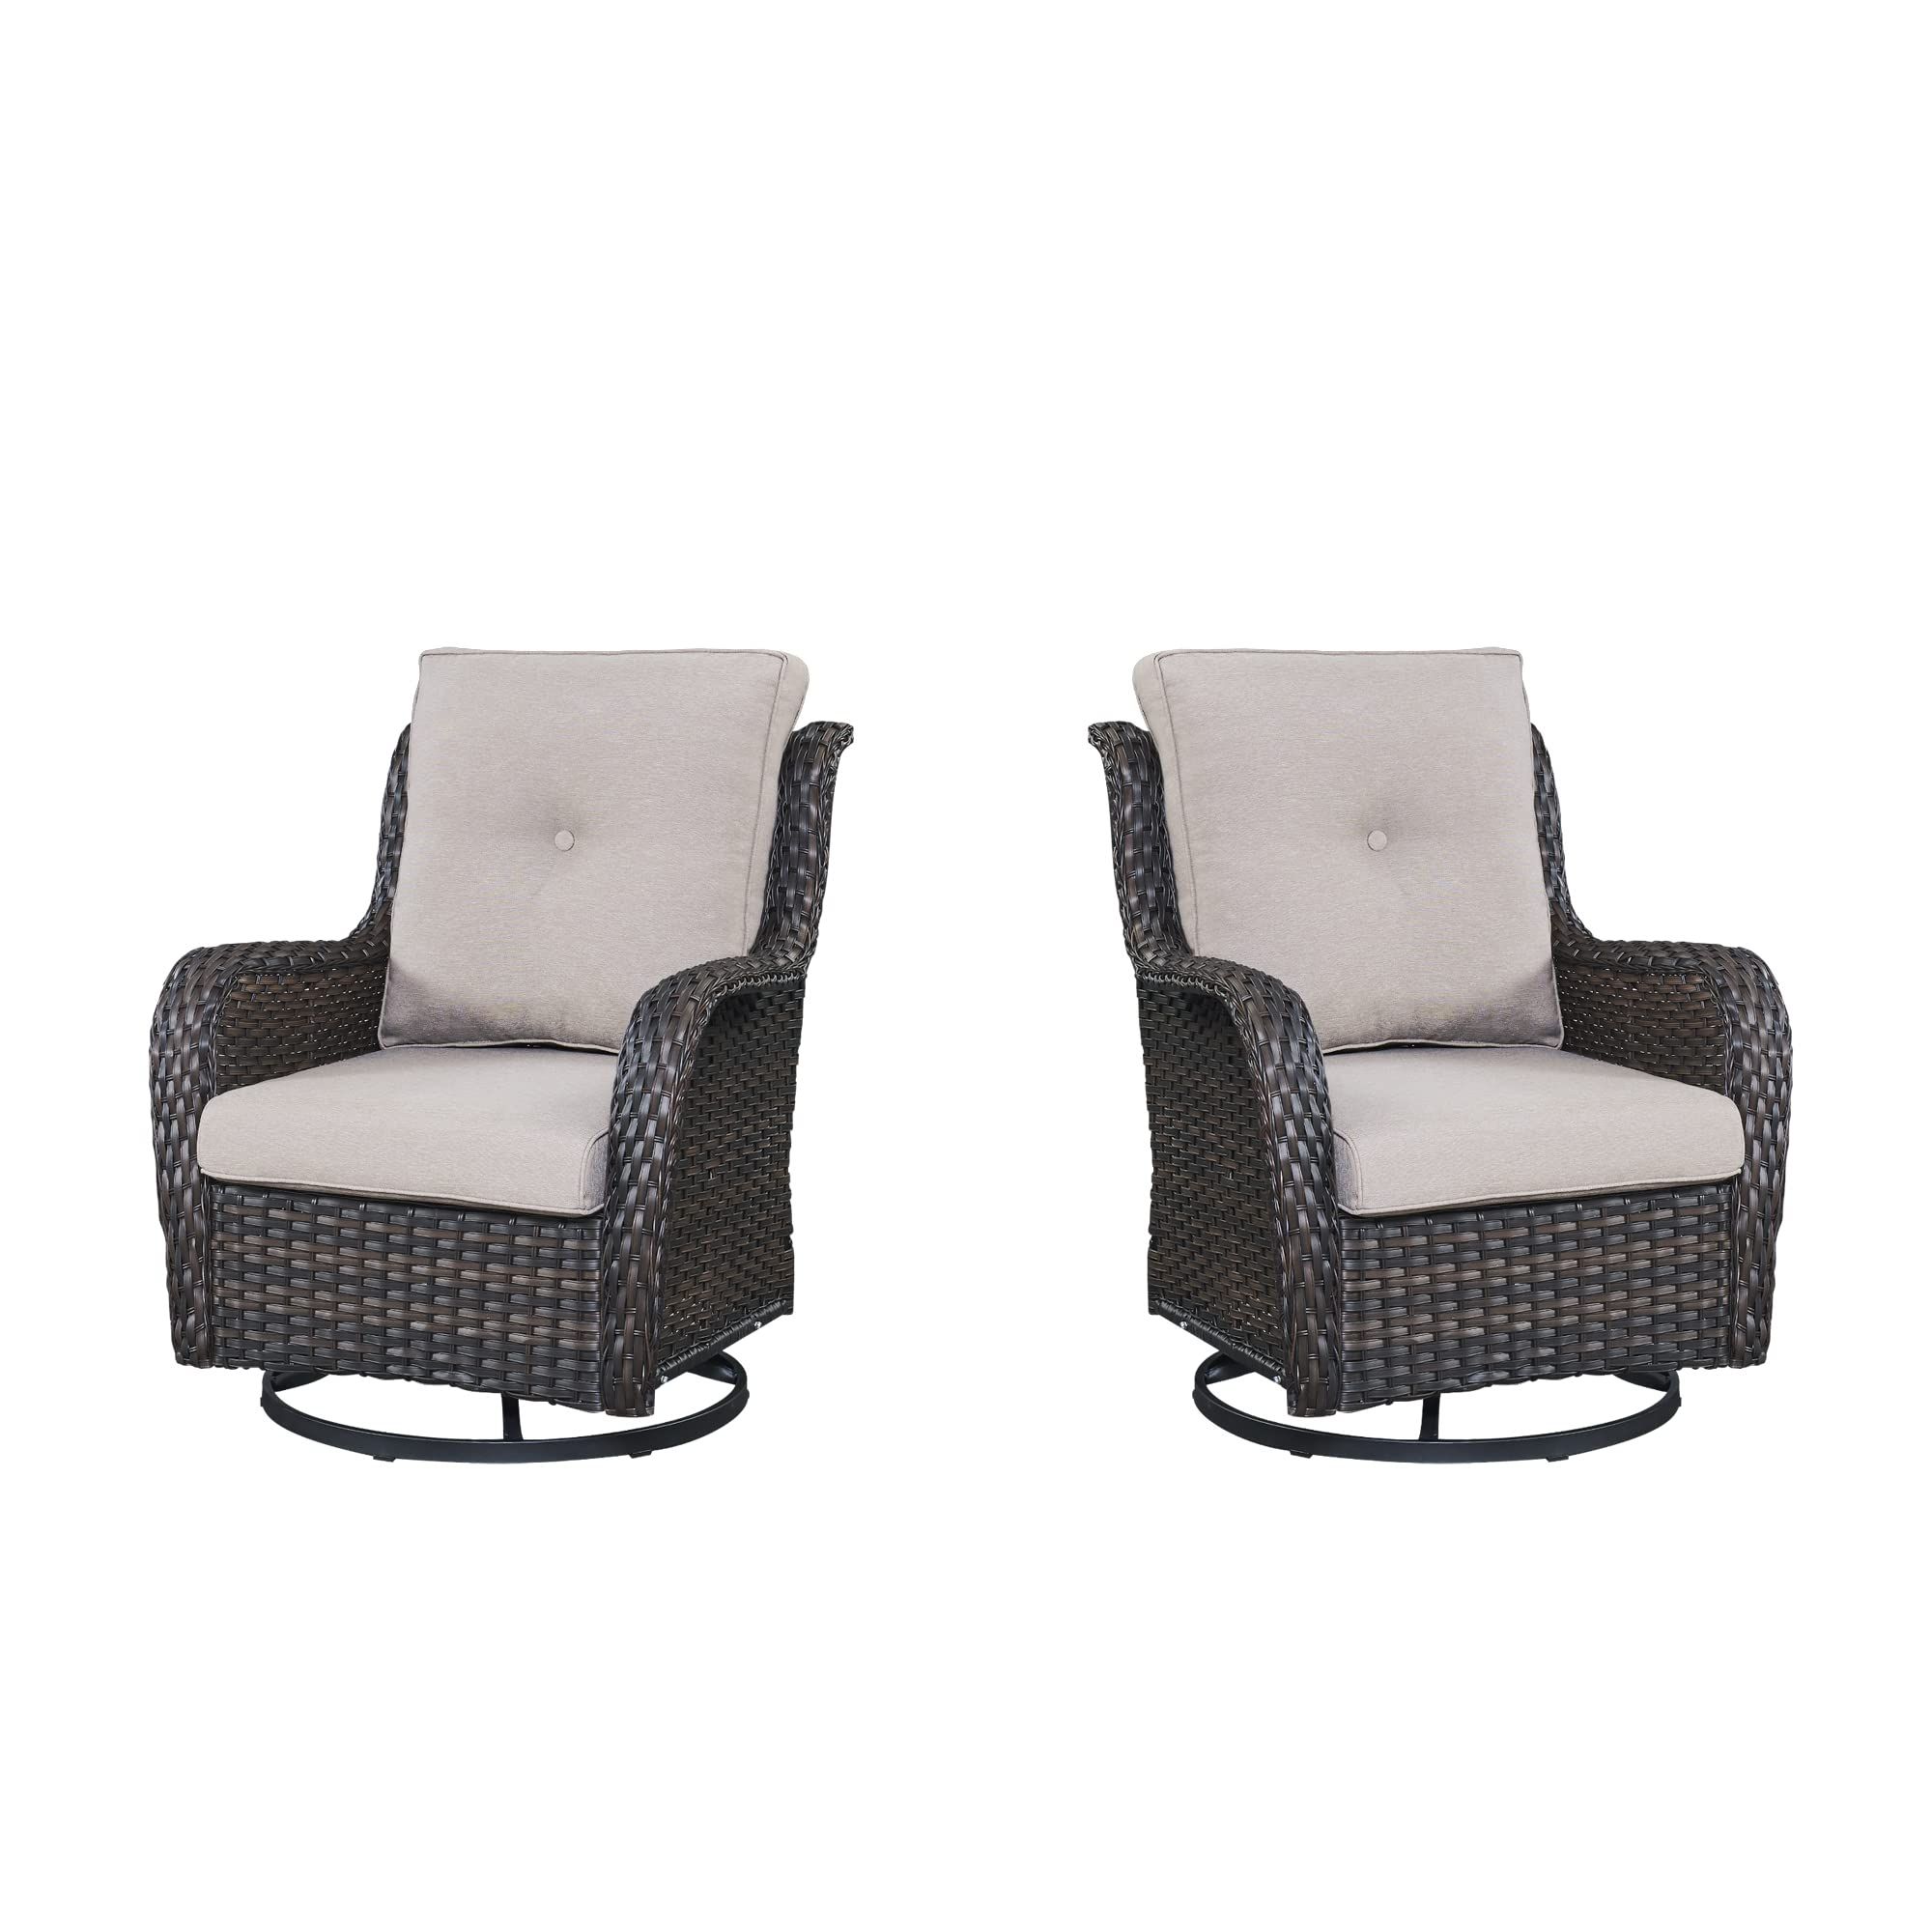 2 Piece Swivel Gliders With Patio Cover Pertaining To 2017 Amazon: Belord Outdoor Swivel Rcoker Patio Chairs – Outdoor Swivel Patio  Chairs Set Of 2 Wicker Chair Patio Furniture Sets With Covered Cushion For  Porch Deck Balcony Garden, Beige : Patio, Lawn (Photo 15 of 15)